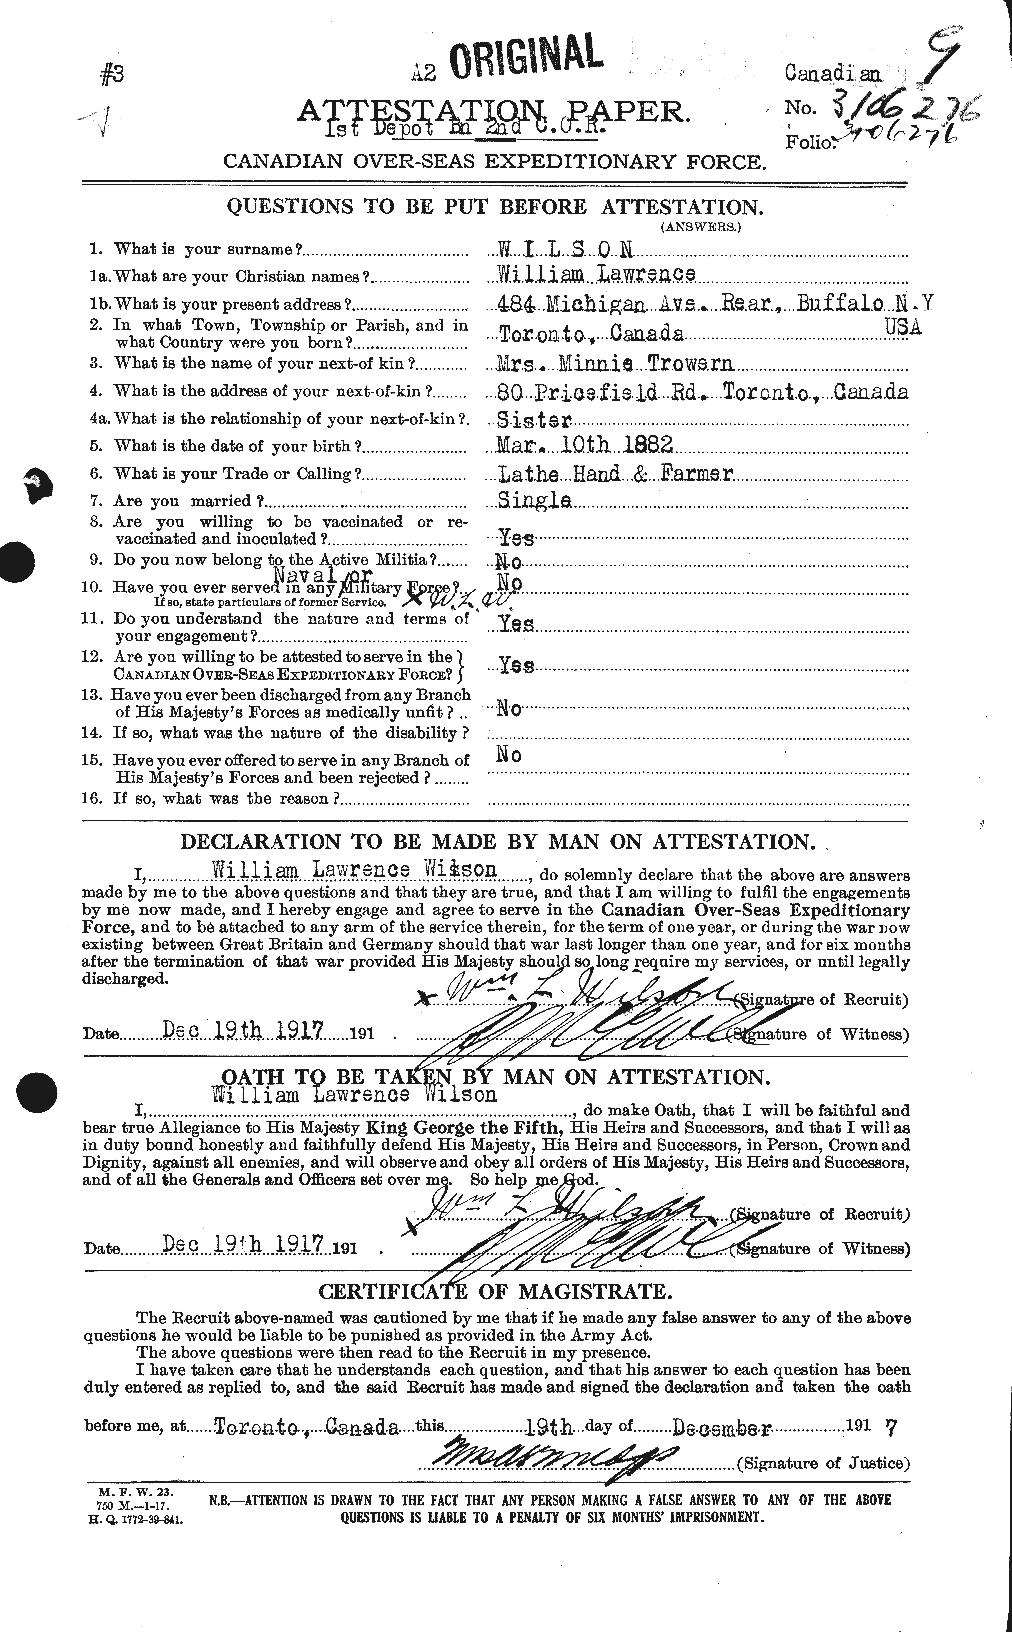 Personnel Records of the First World War - CEF 684068a